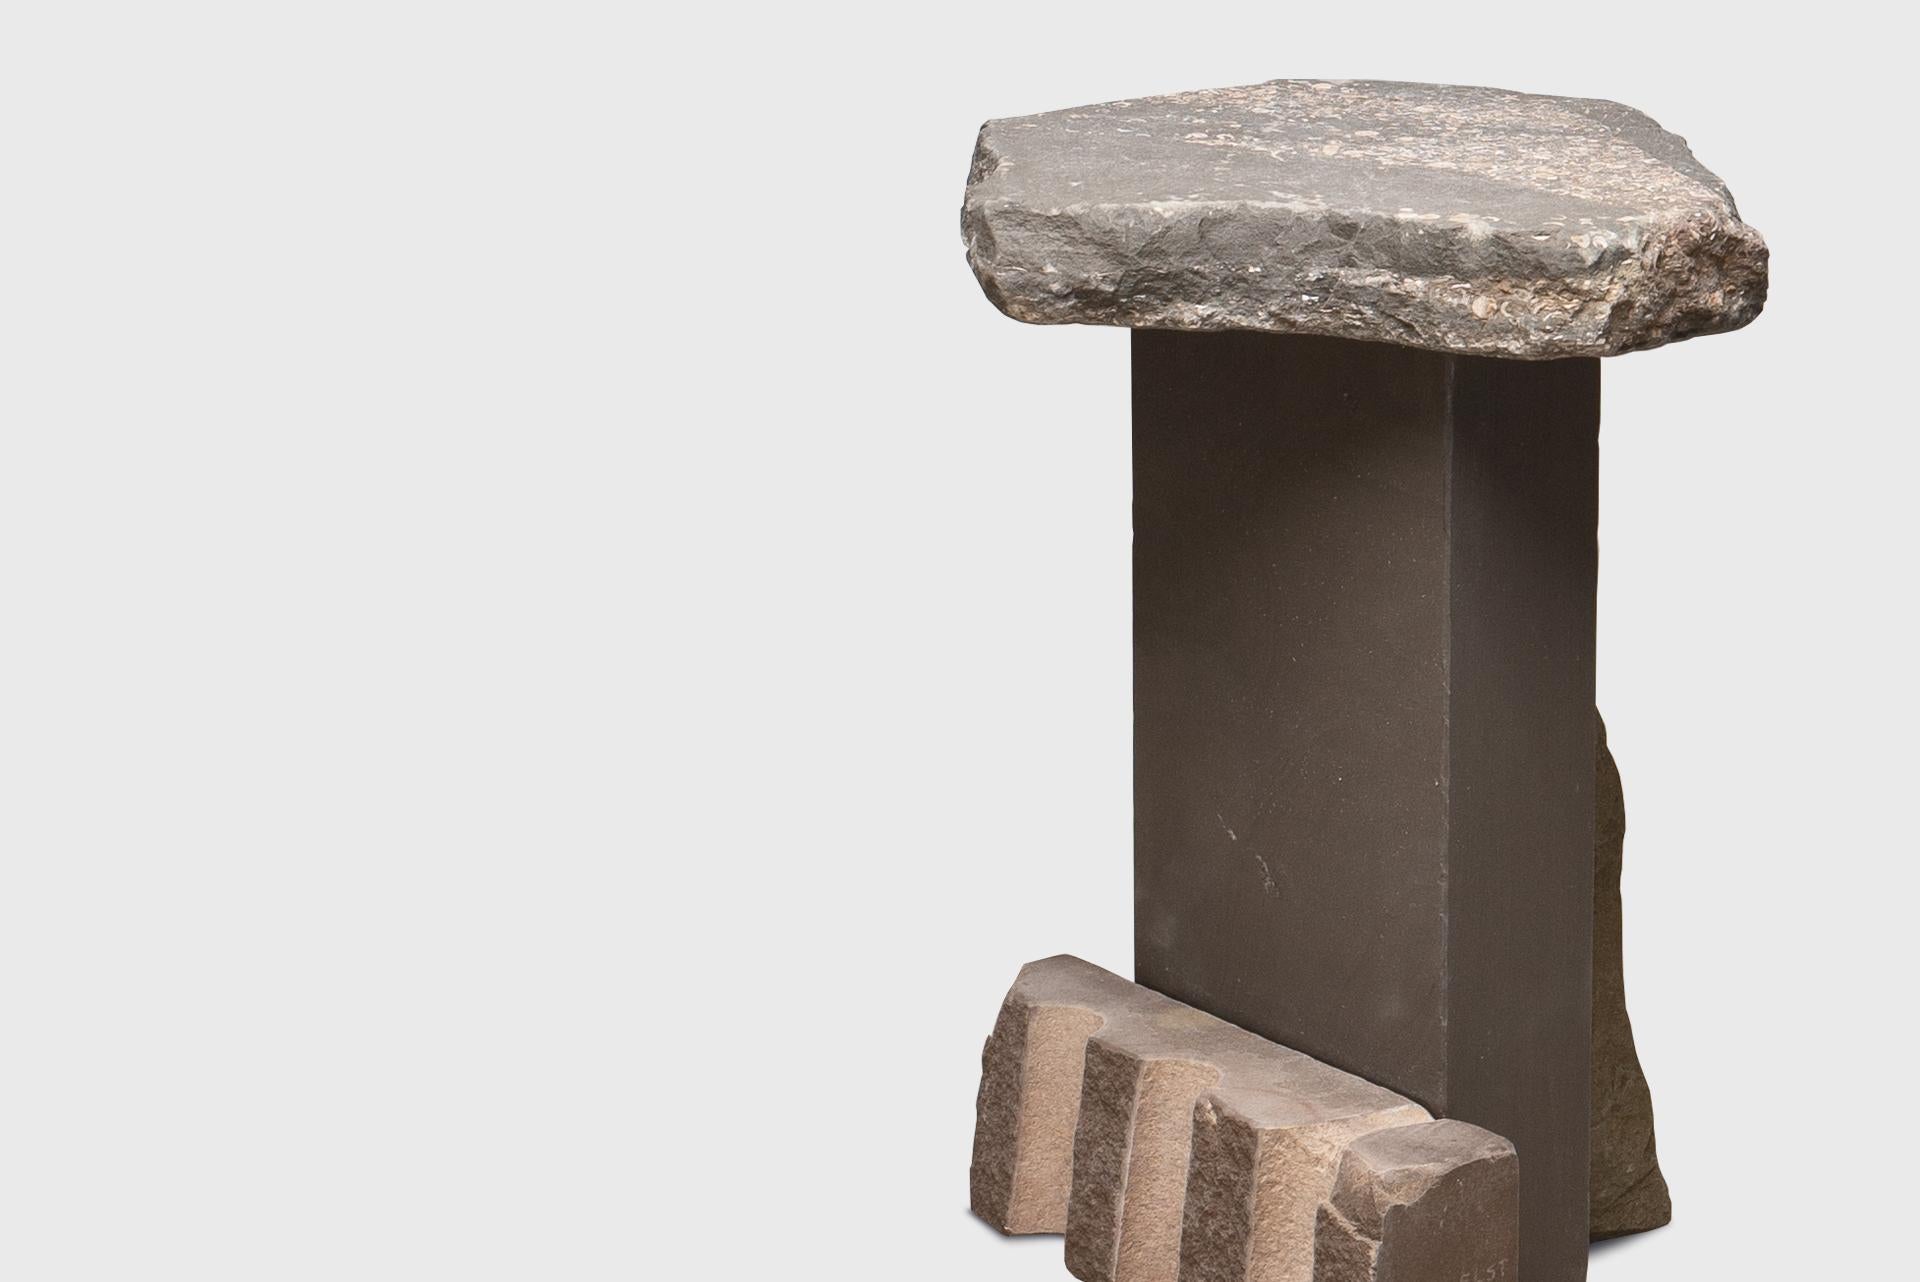 Contemporary Natural Side Table 2, Graywacke Offcut Stone, Carsten in Der Elst For Sale 1